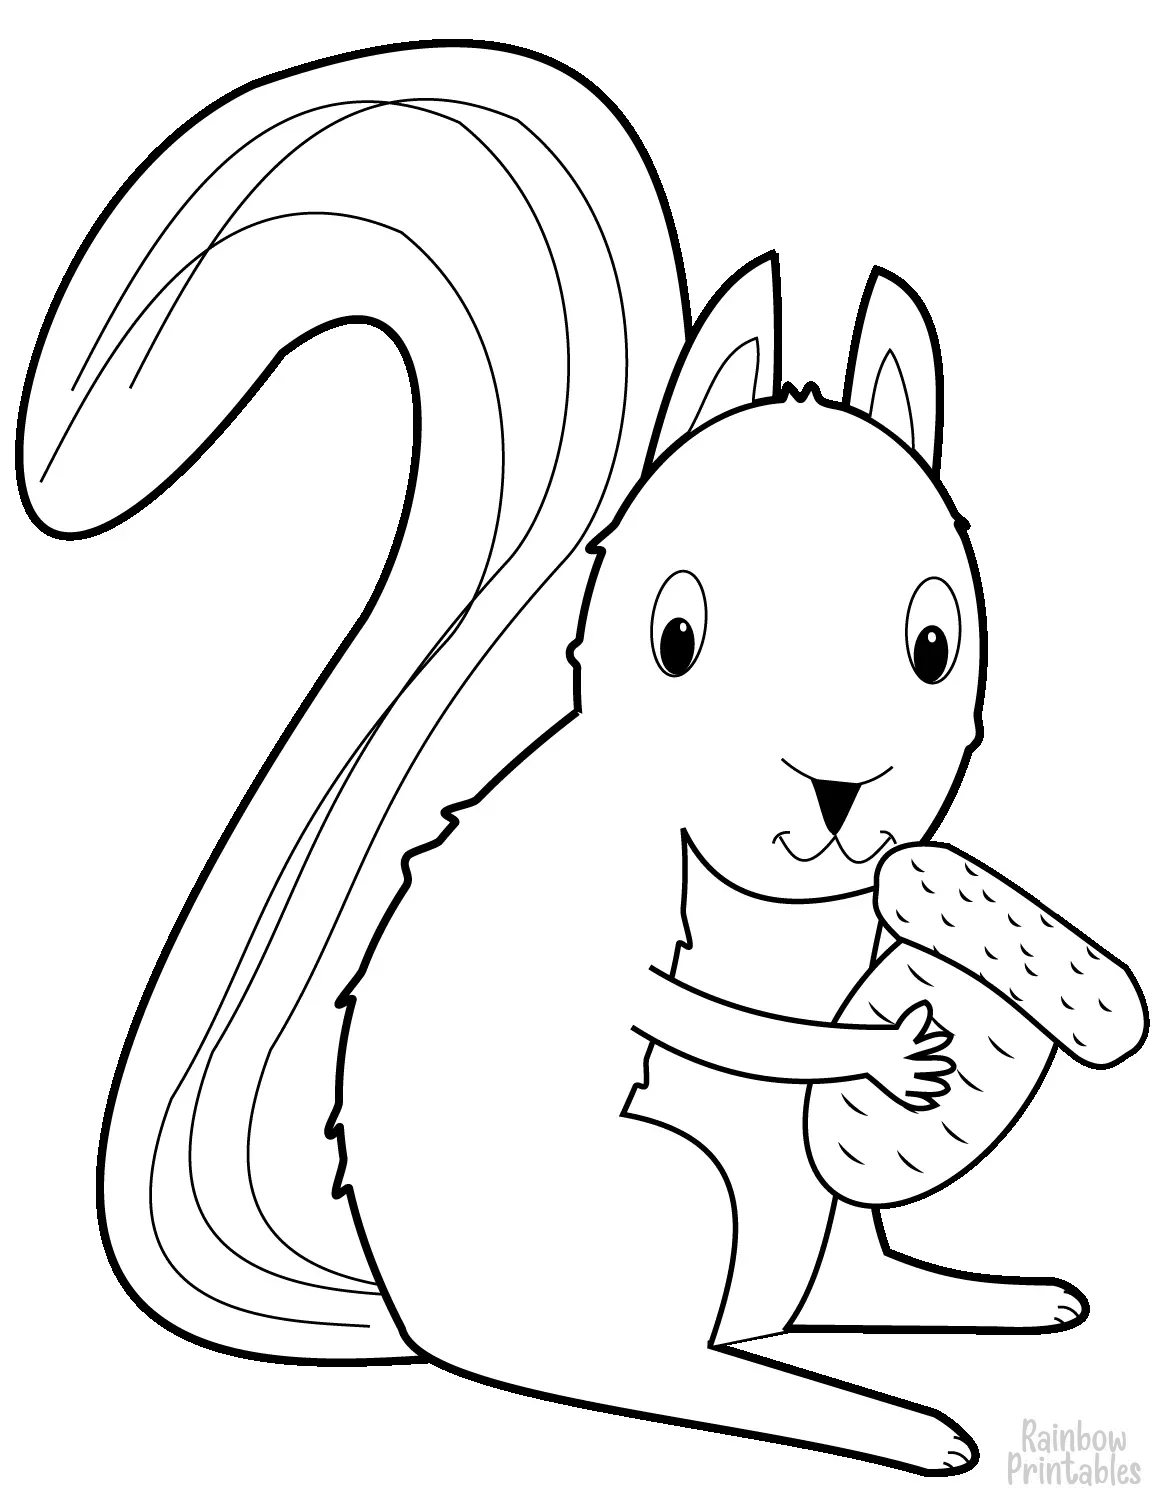 SIMPLE-EASY-line-drawings-SQUIRREL ACORN-coloring-page-for-kids